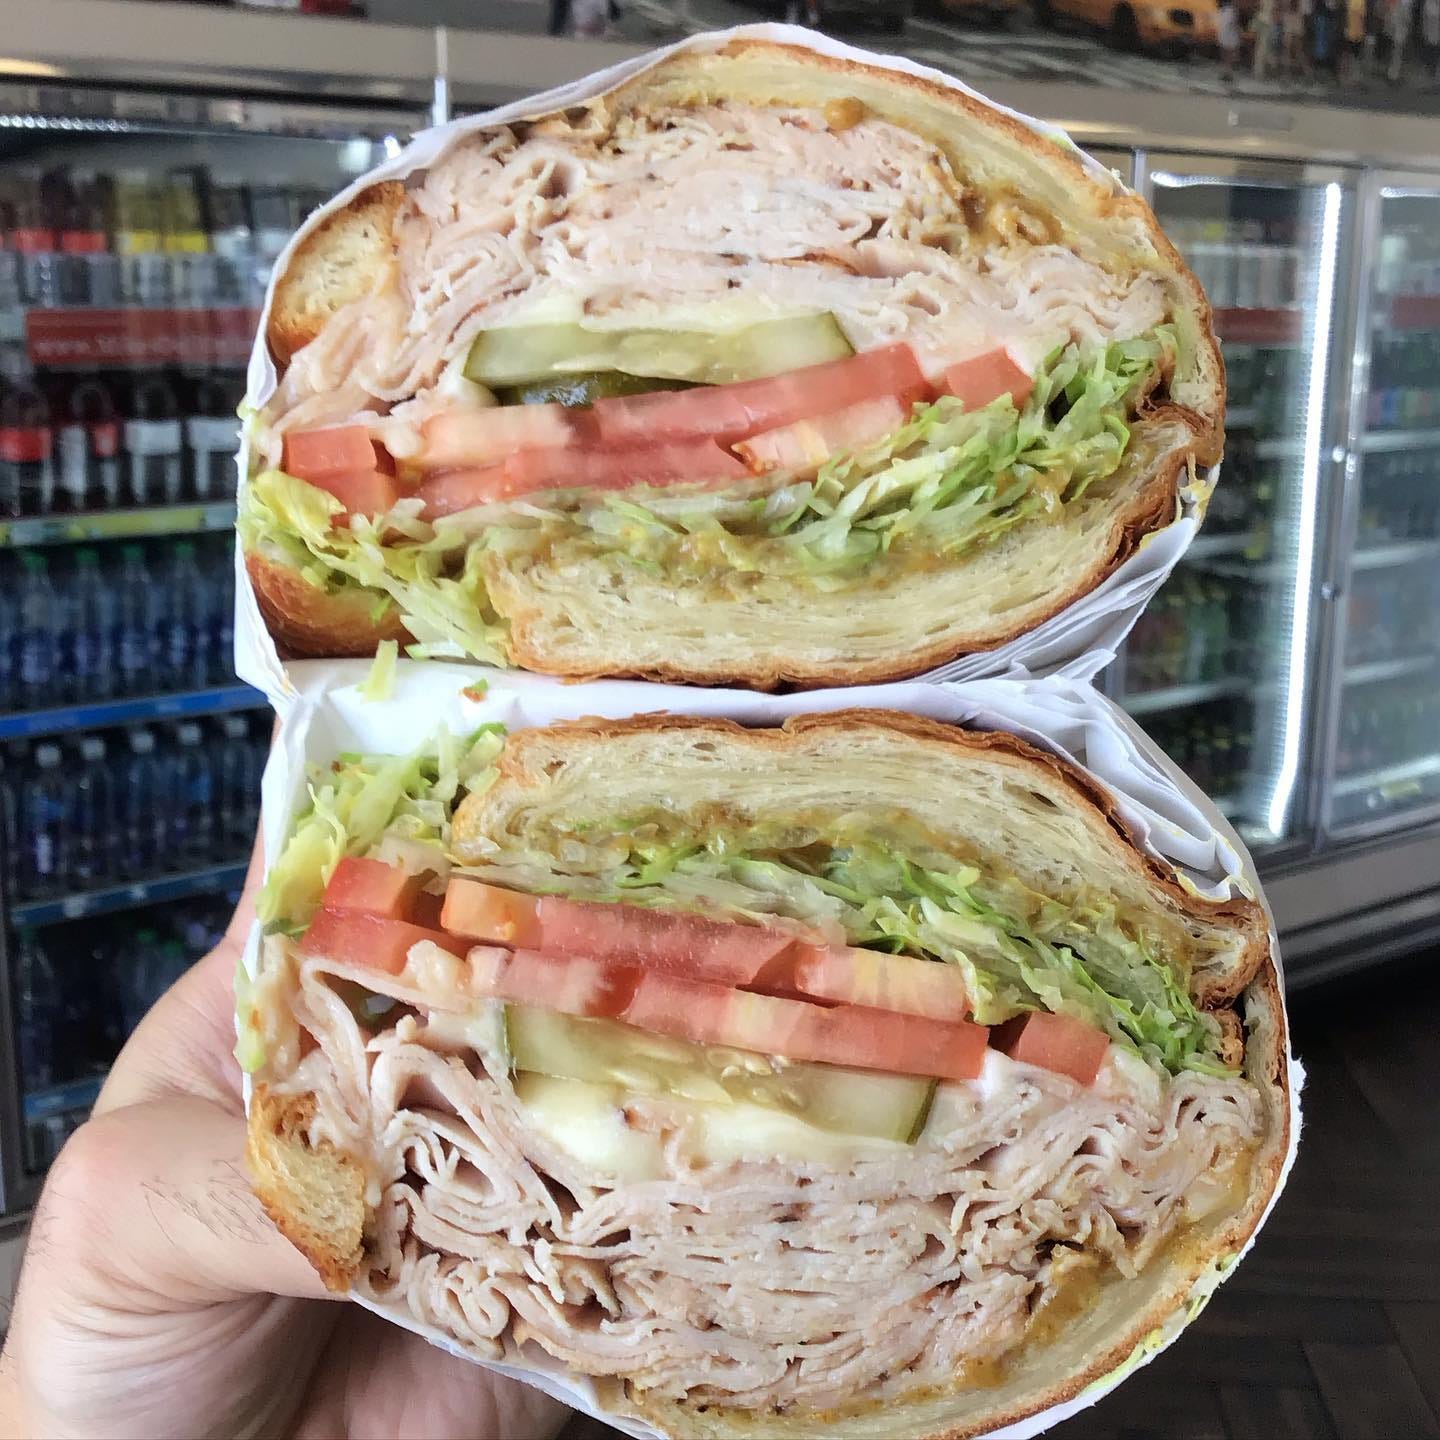 Is There a Difference Between Hoagies, Heroes, Subs, and Grinders?